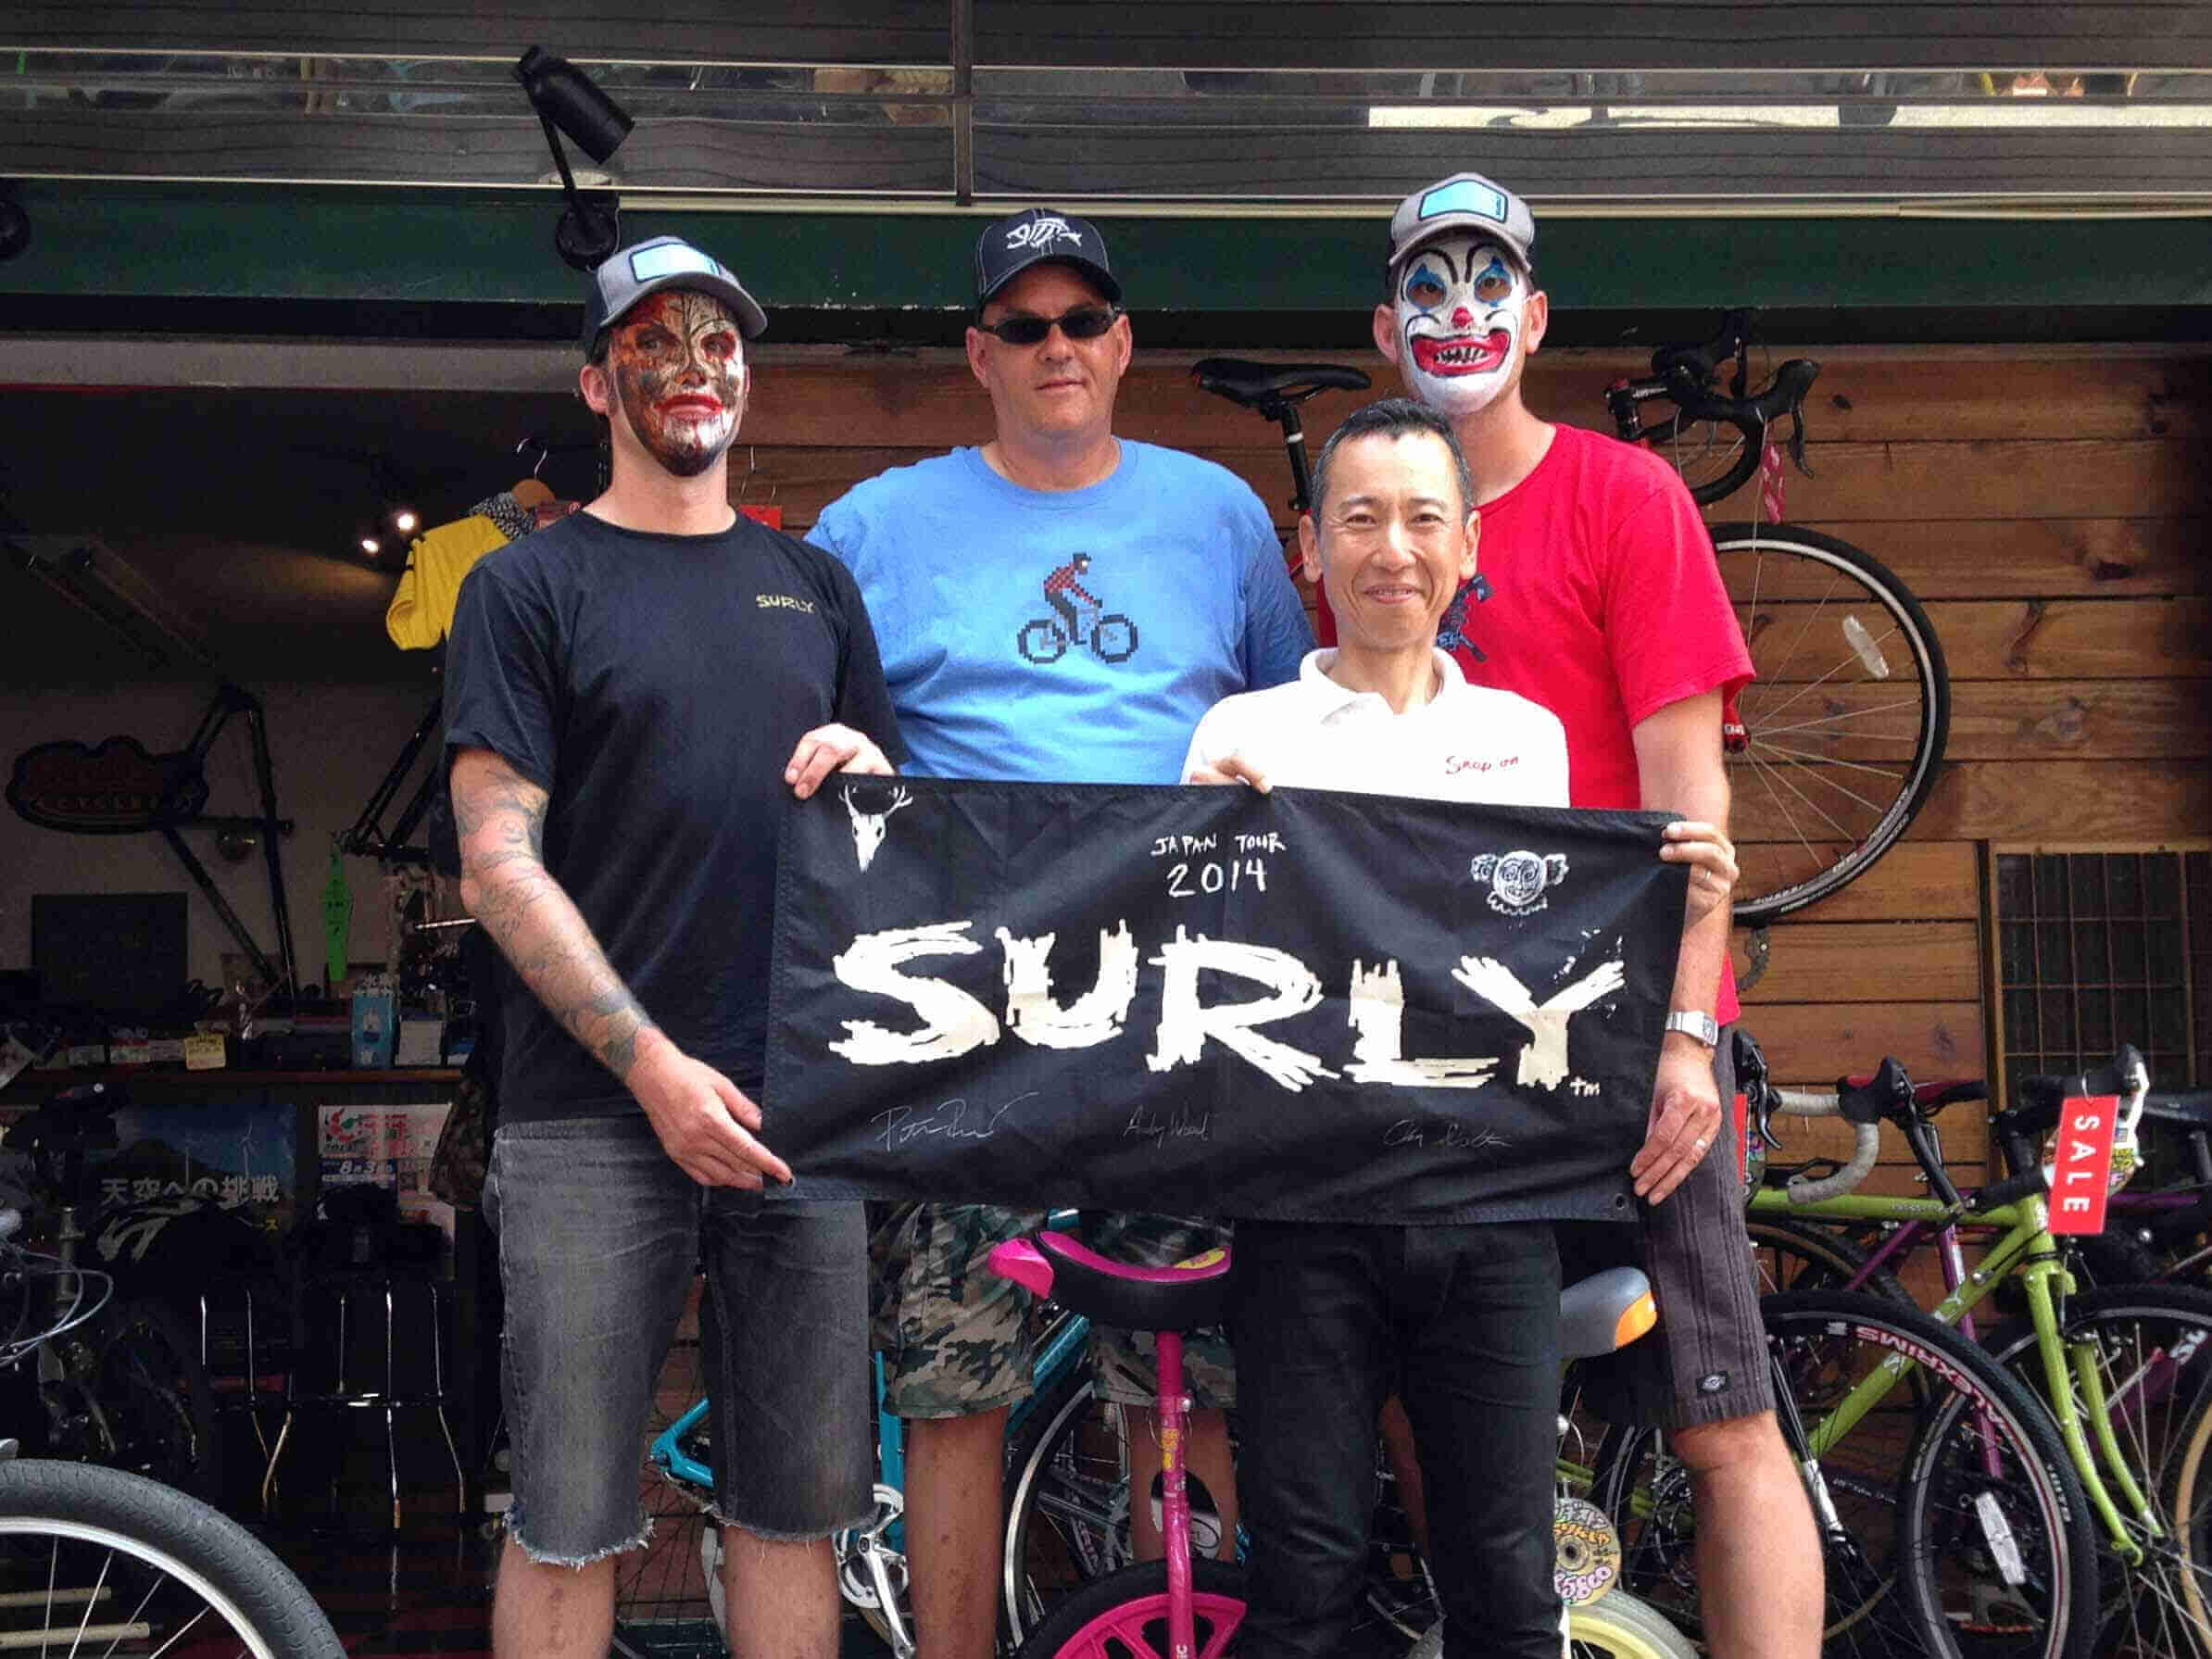 Front view of 4 people posing with a Surly banner in front of them, with a bike shop behind in the background